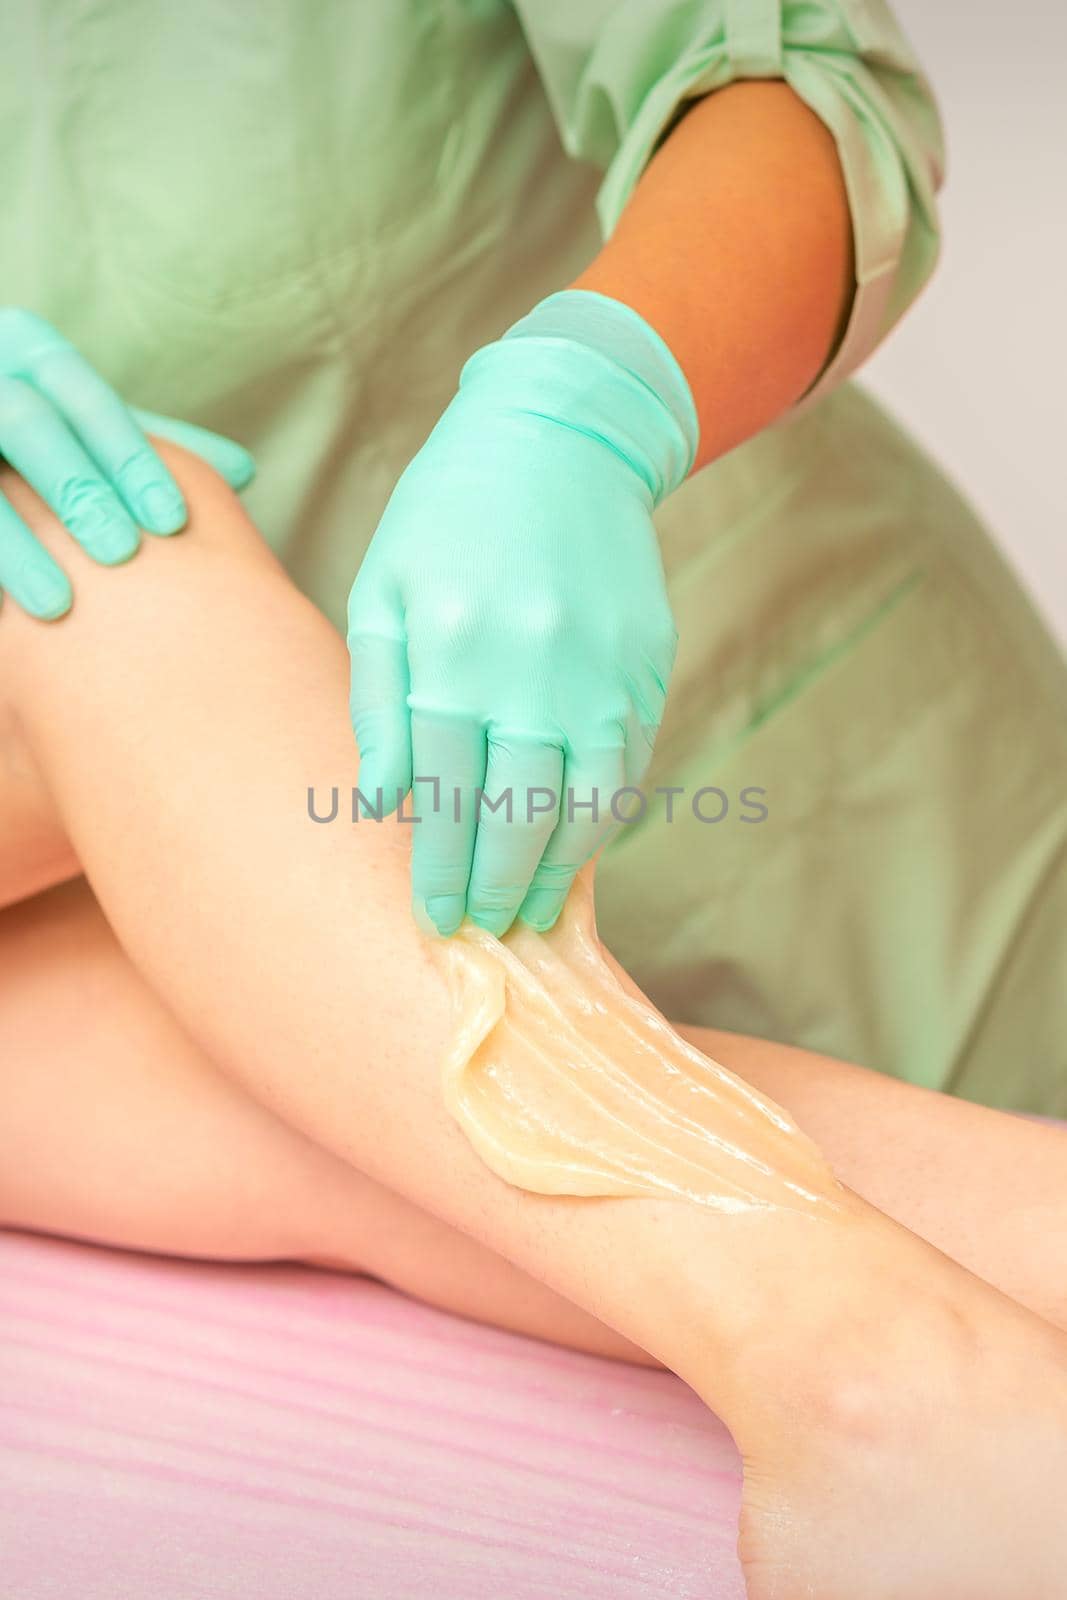 Sugaring legs. Woman legs hair removing. Hands in pink and blue rubber gloves of two beauticians apply sugar paste on female feet